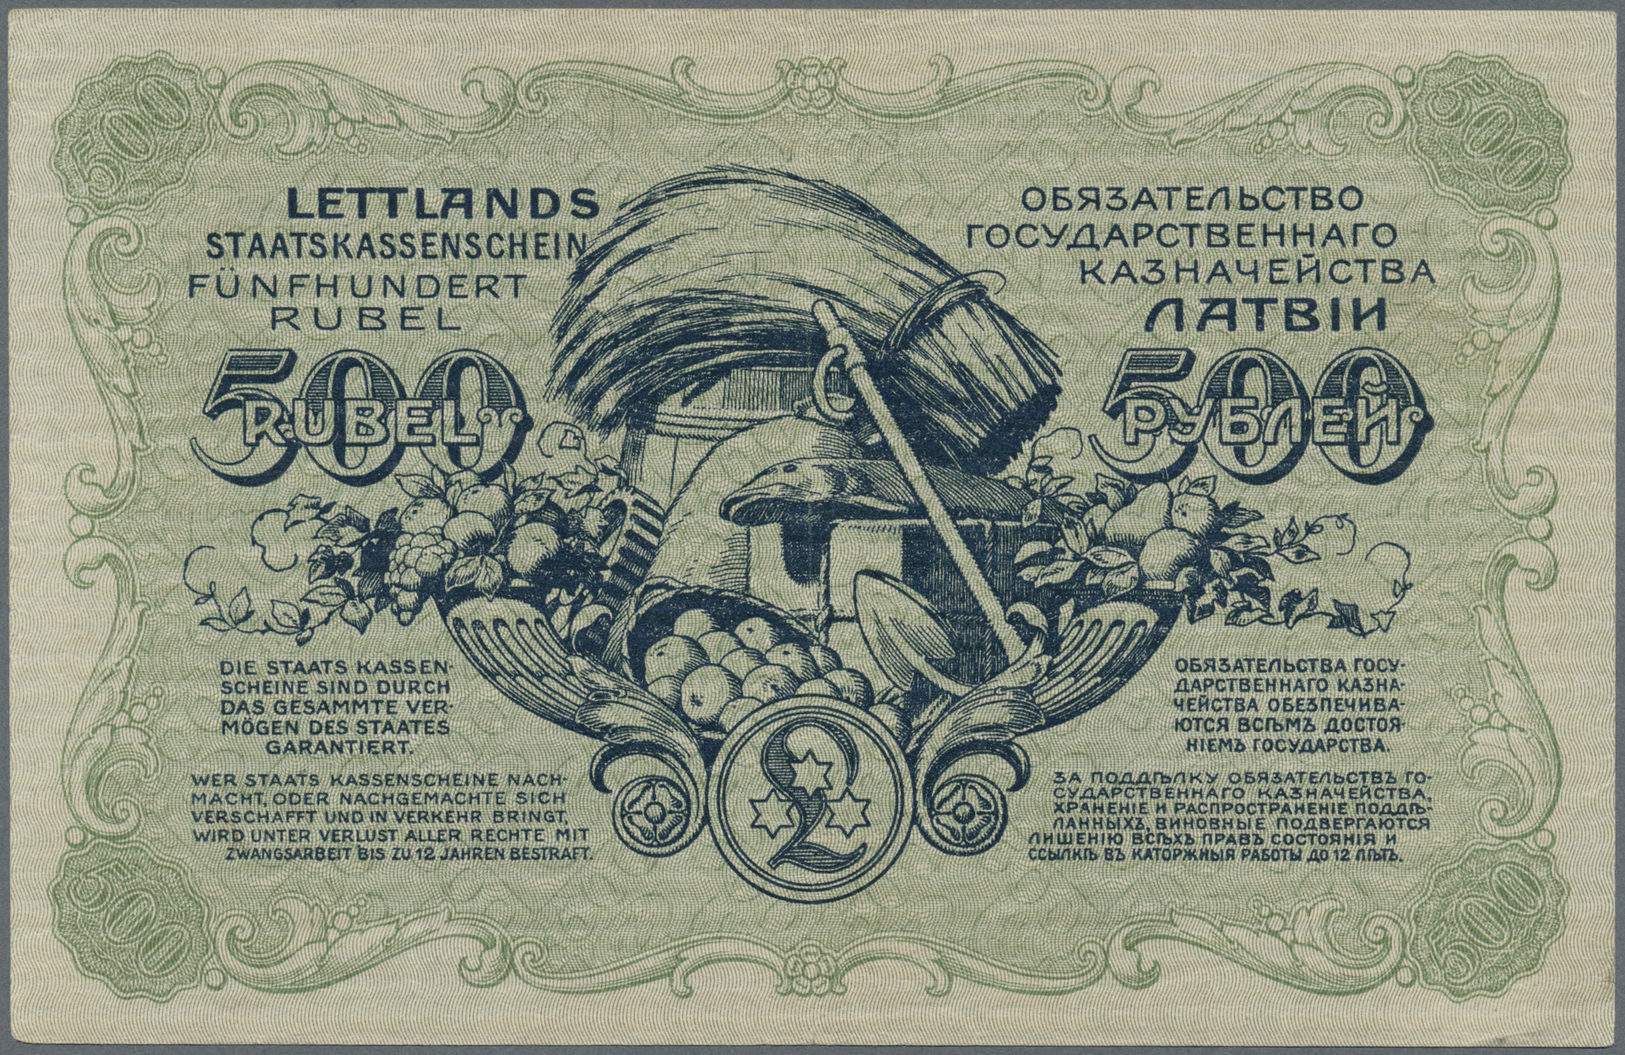 01429 Latvia / Lettland: 500 Rubli 1920 P. 8a, Sign. Purins, Series "C", Nice Serial Number #211117, 3 Vertical Folds, D - Latvia